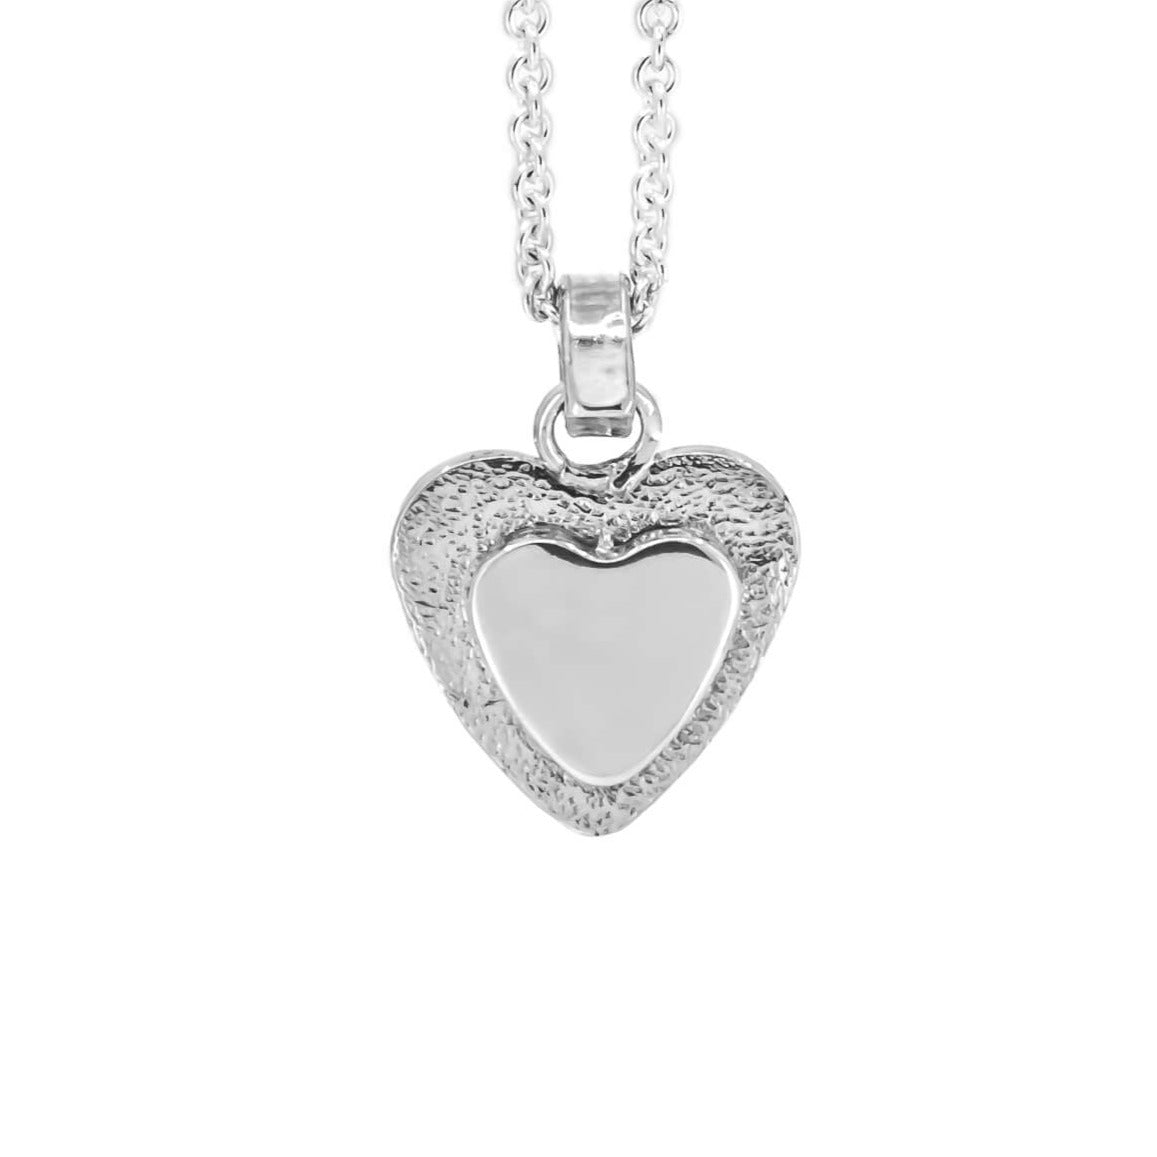 Sterling silver heart pendant with stardust texture